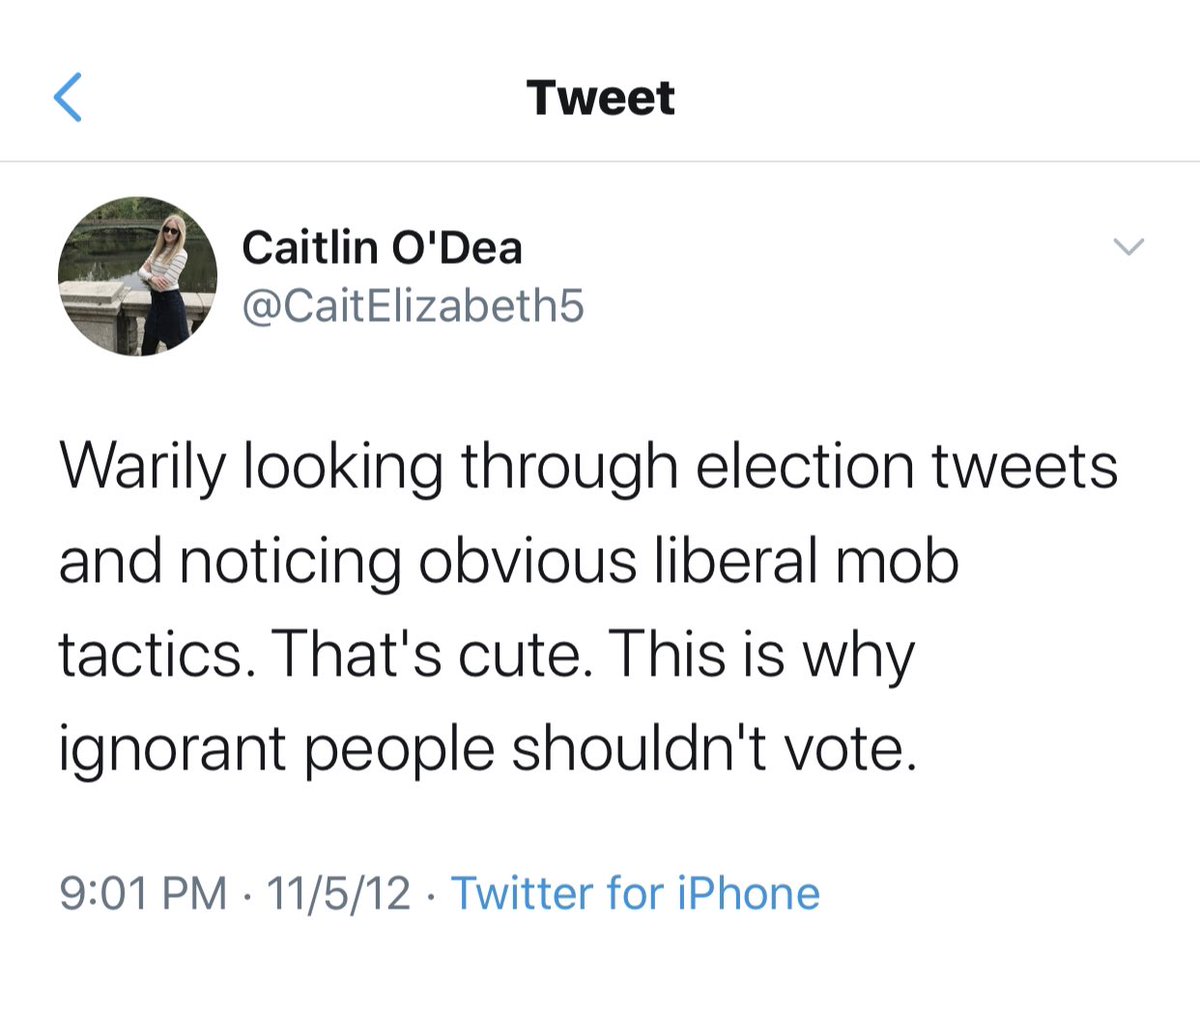 No wonder Kelly Loeffler hired Caitlin O’Dea. Caitlin doesn’t think her “ignorant” political opponents should be allowed to vote.